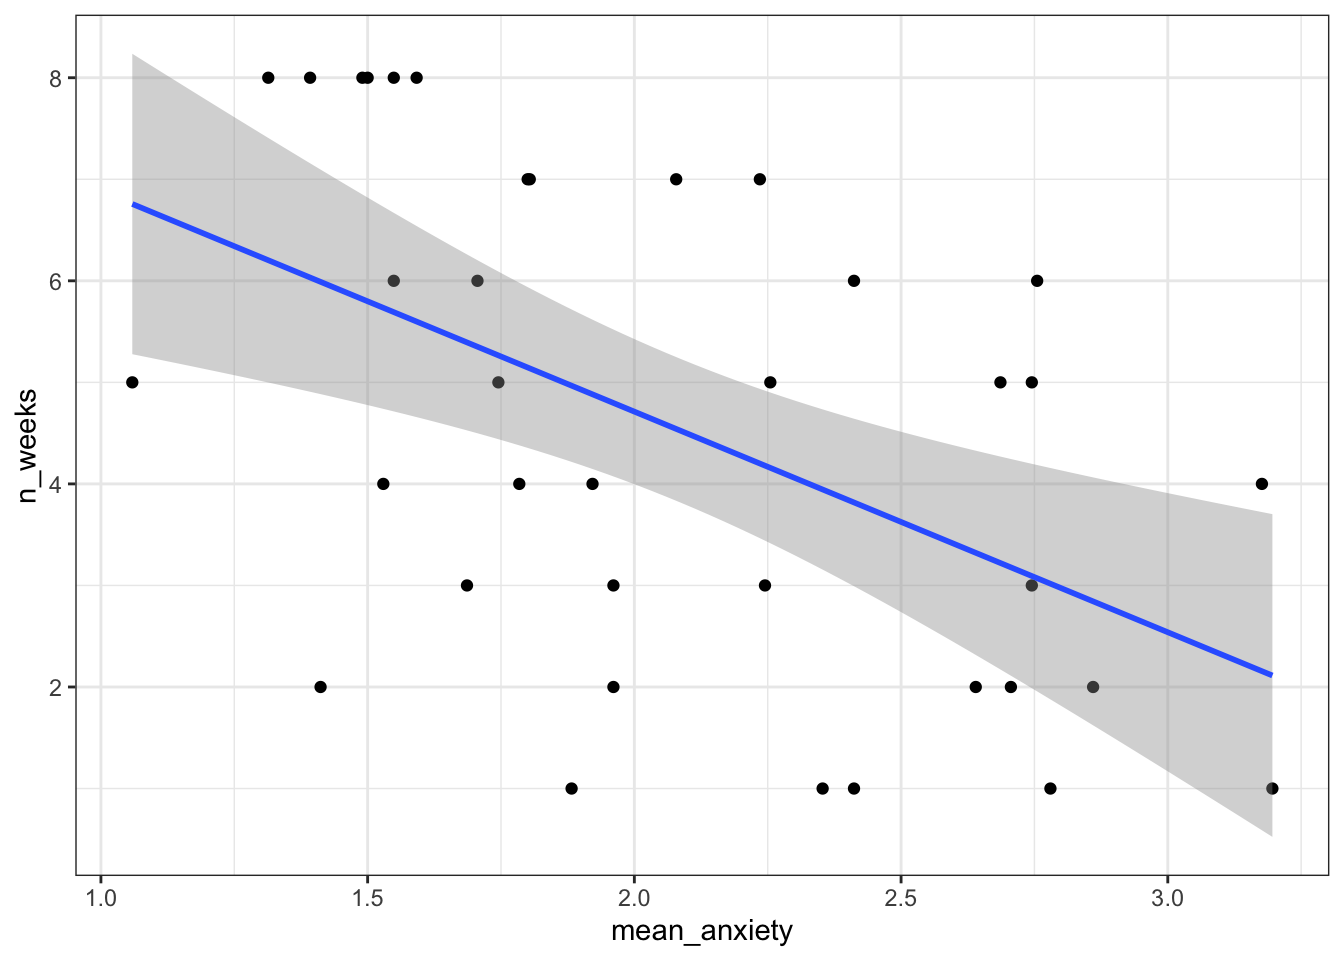 Scatteplot of mean anxiety and attendance